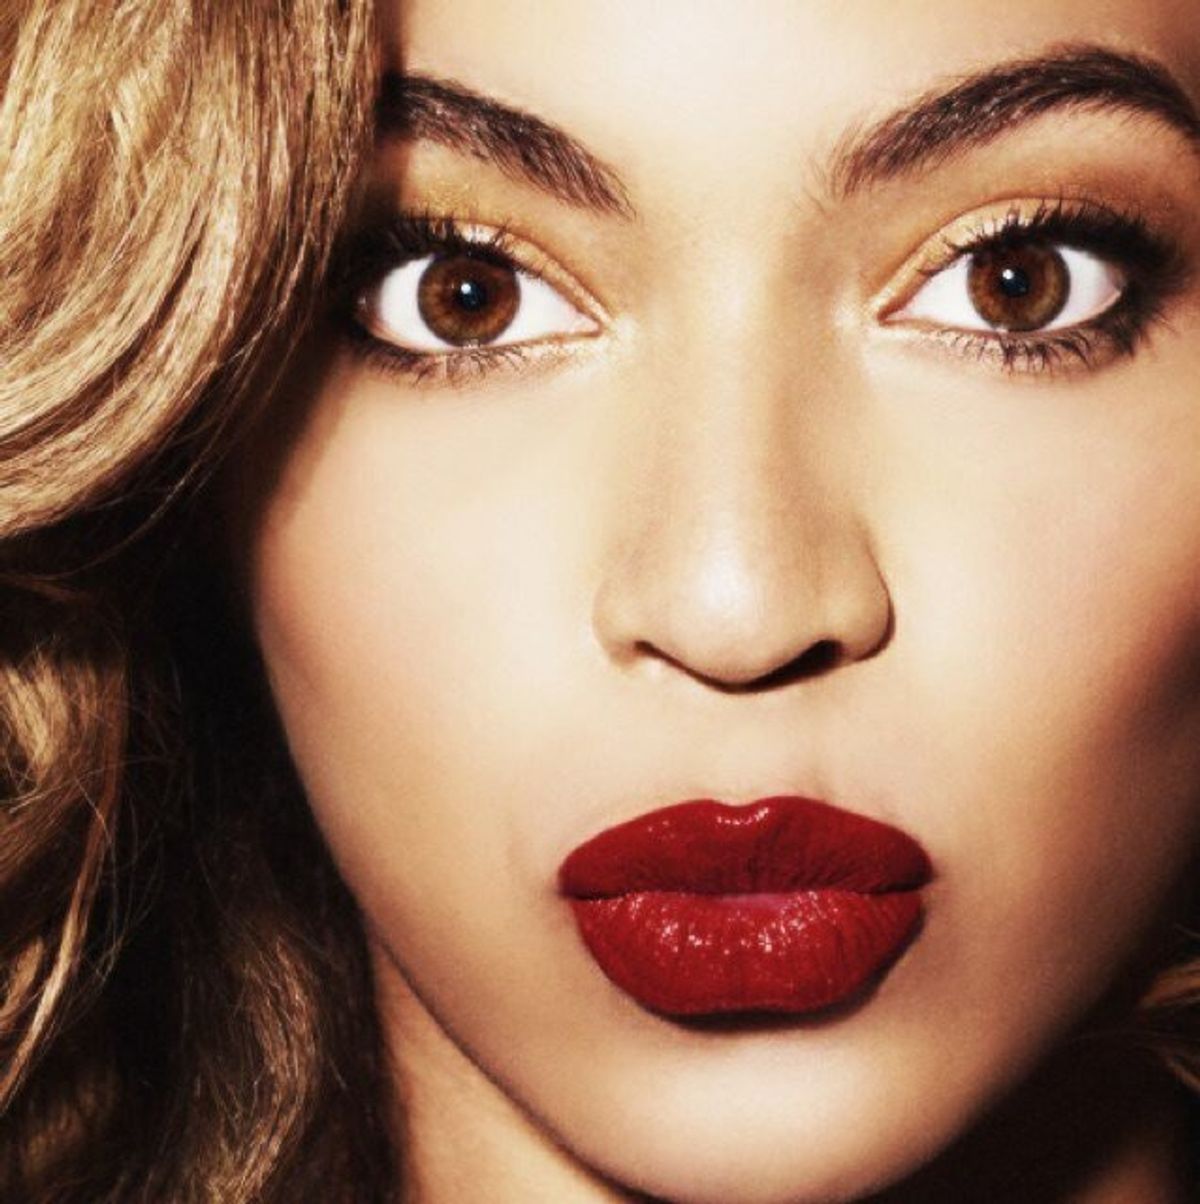 16 Reasons Why Beyoncé Is Fresher Than You